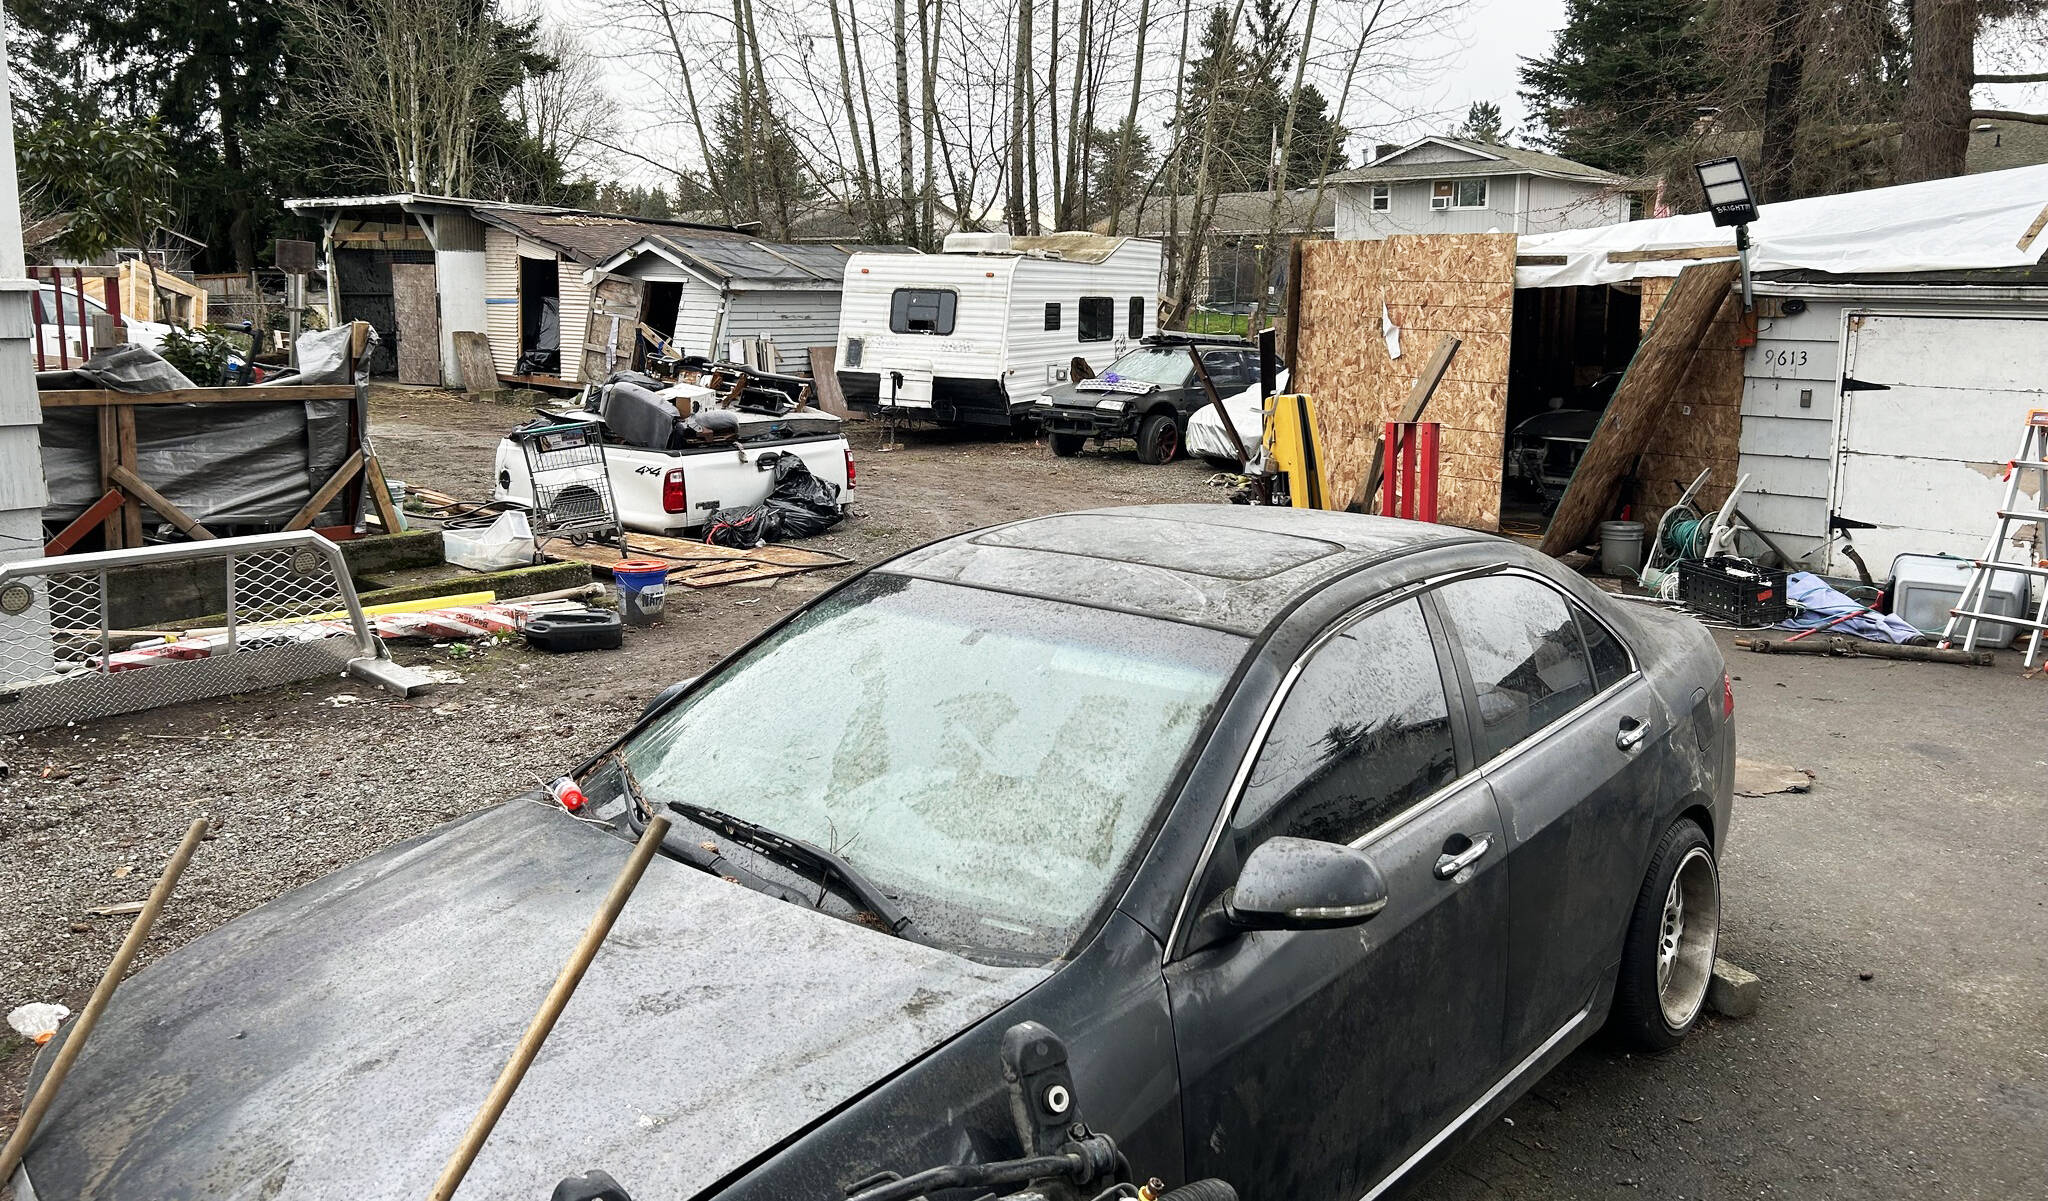 Kent Police executed a search warrant on an alleged chop shop on the East Hill at 9613 S. 240th St. COURTESY PHOTO, Kent Police